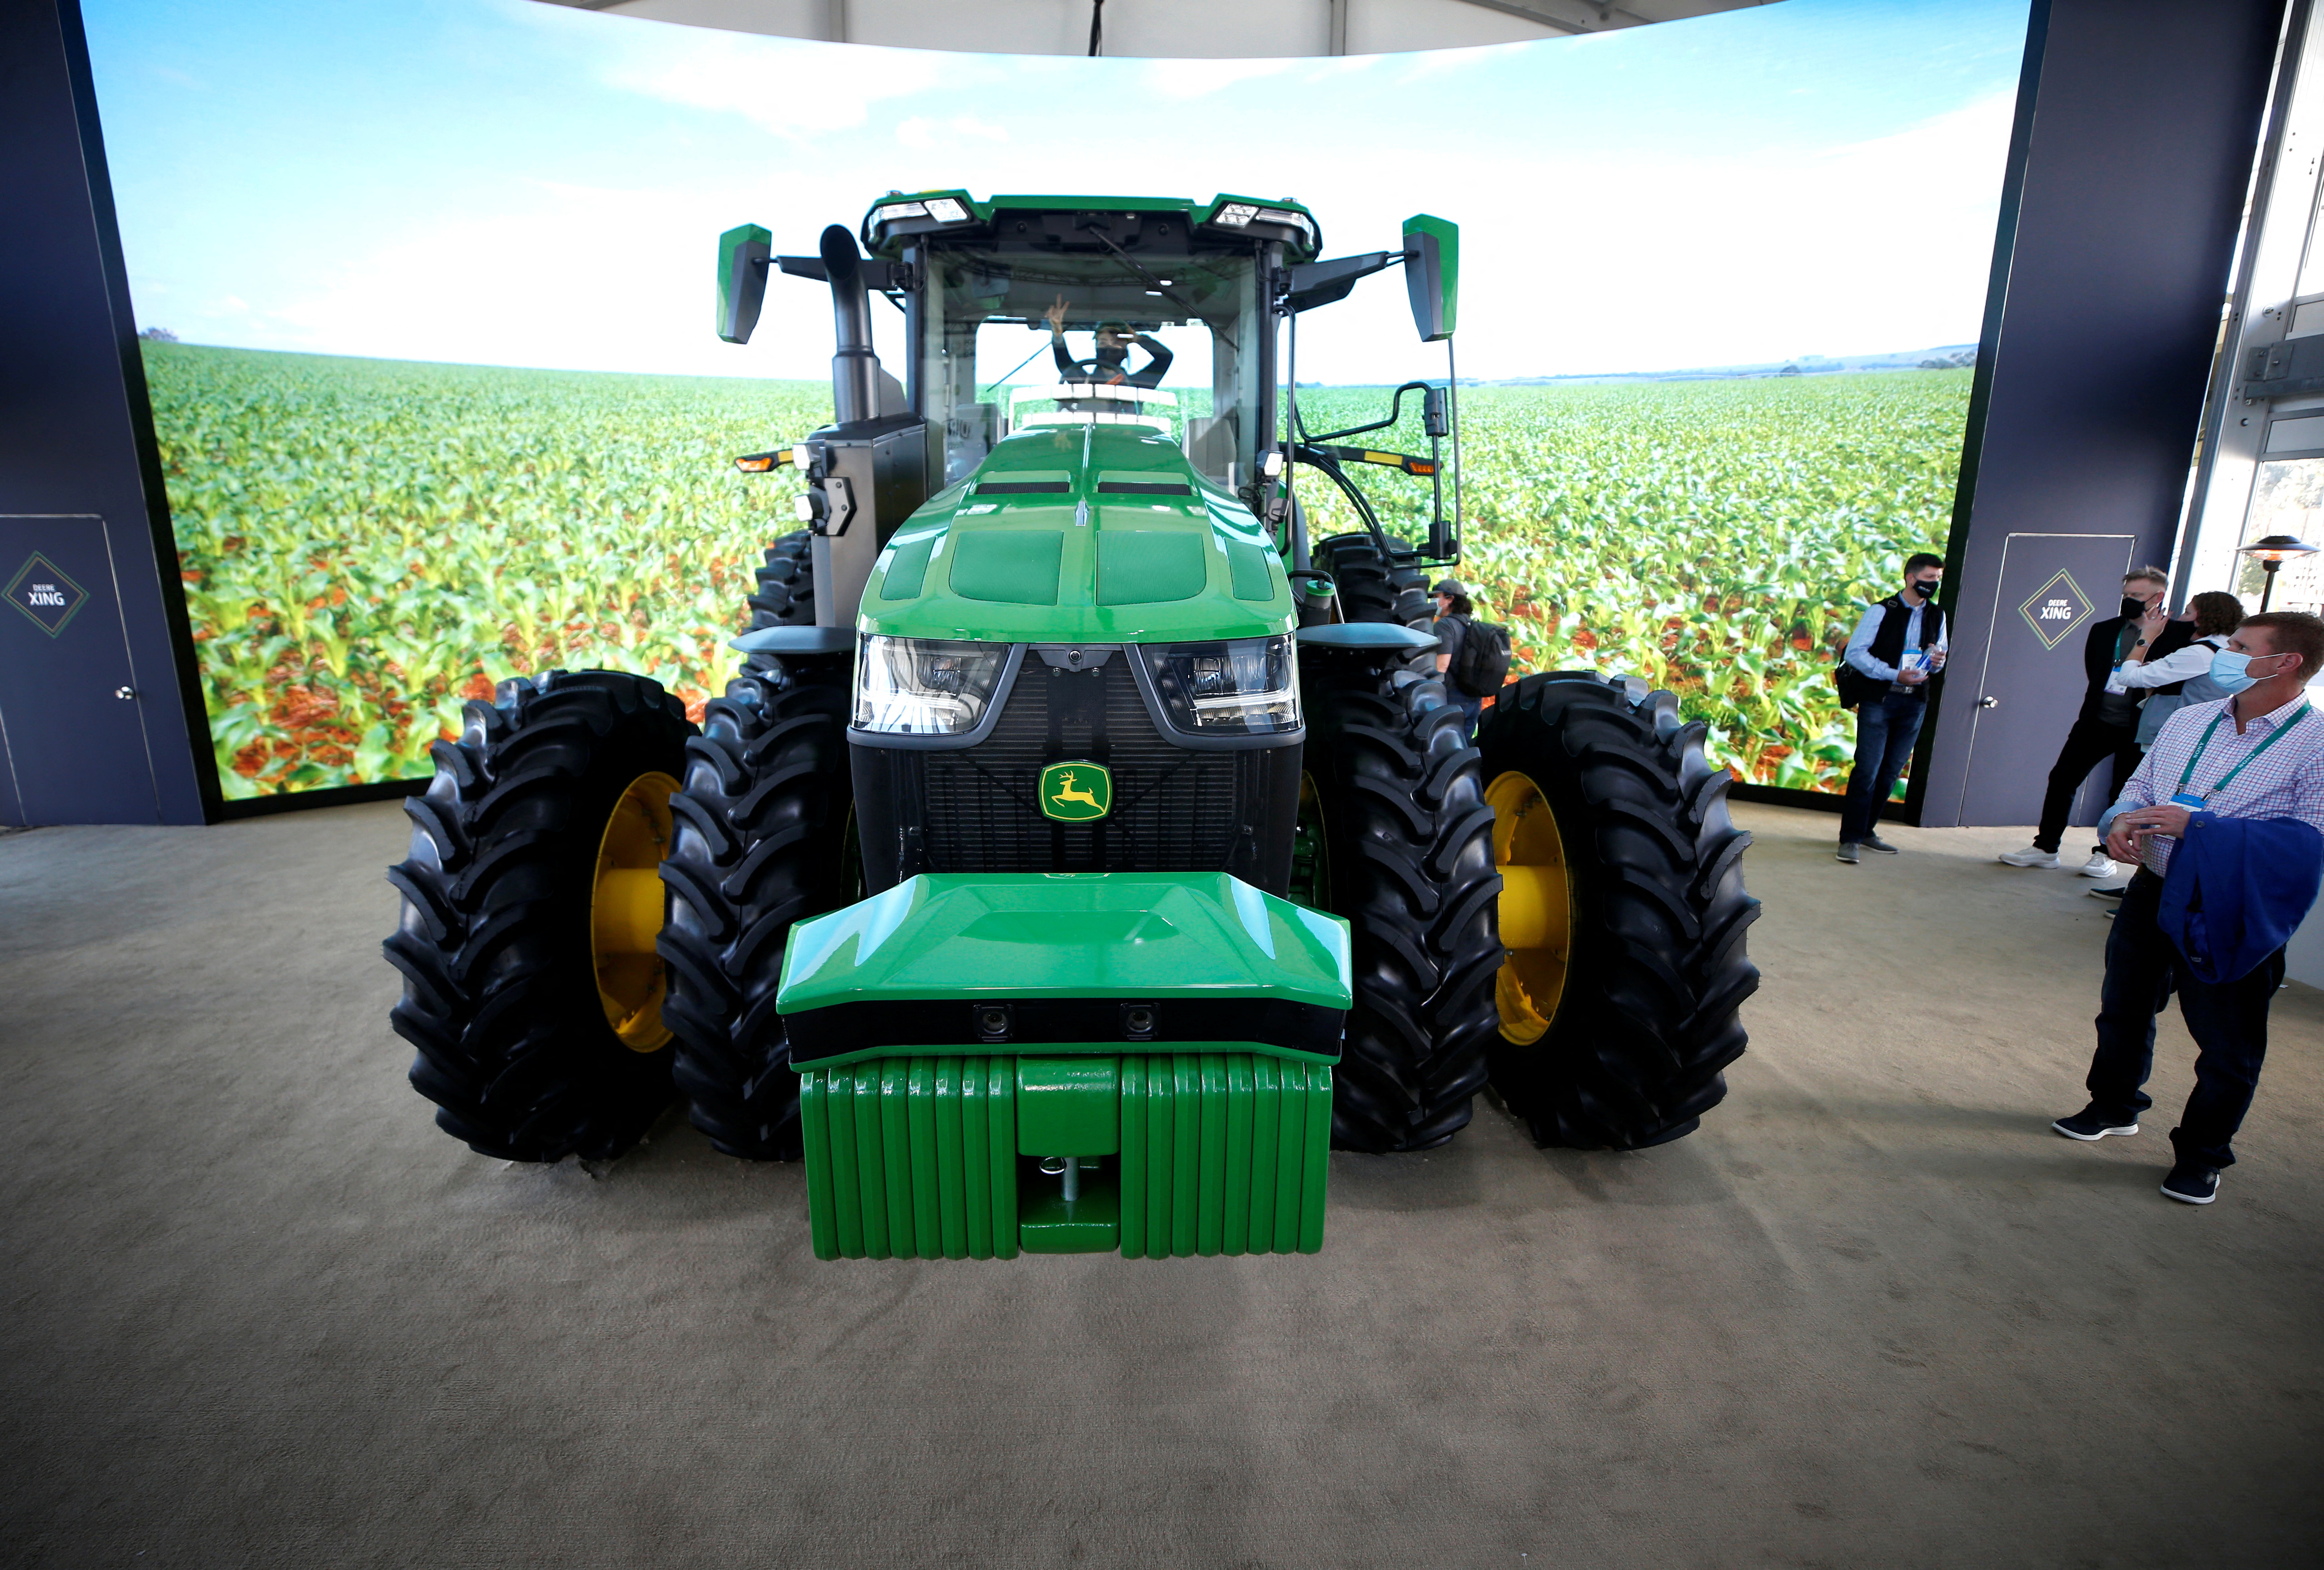 The John Deere 8R autonomous tractor is displayed at the Las Vegas Convention Center during CES 2022 in Las Vegas, Nevada, U.S., January 6, 2022. REUTERS/Steve Marcus